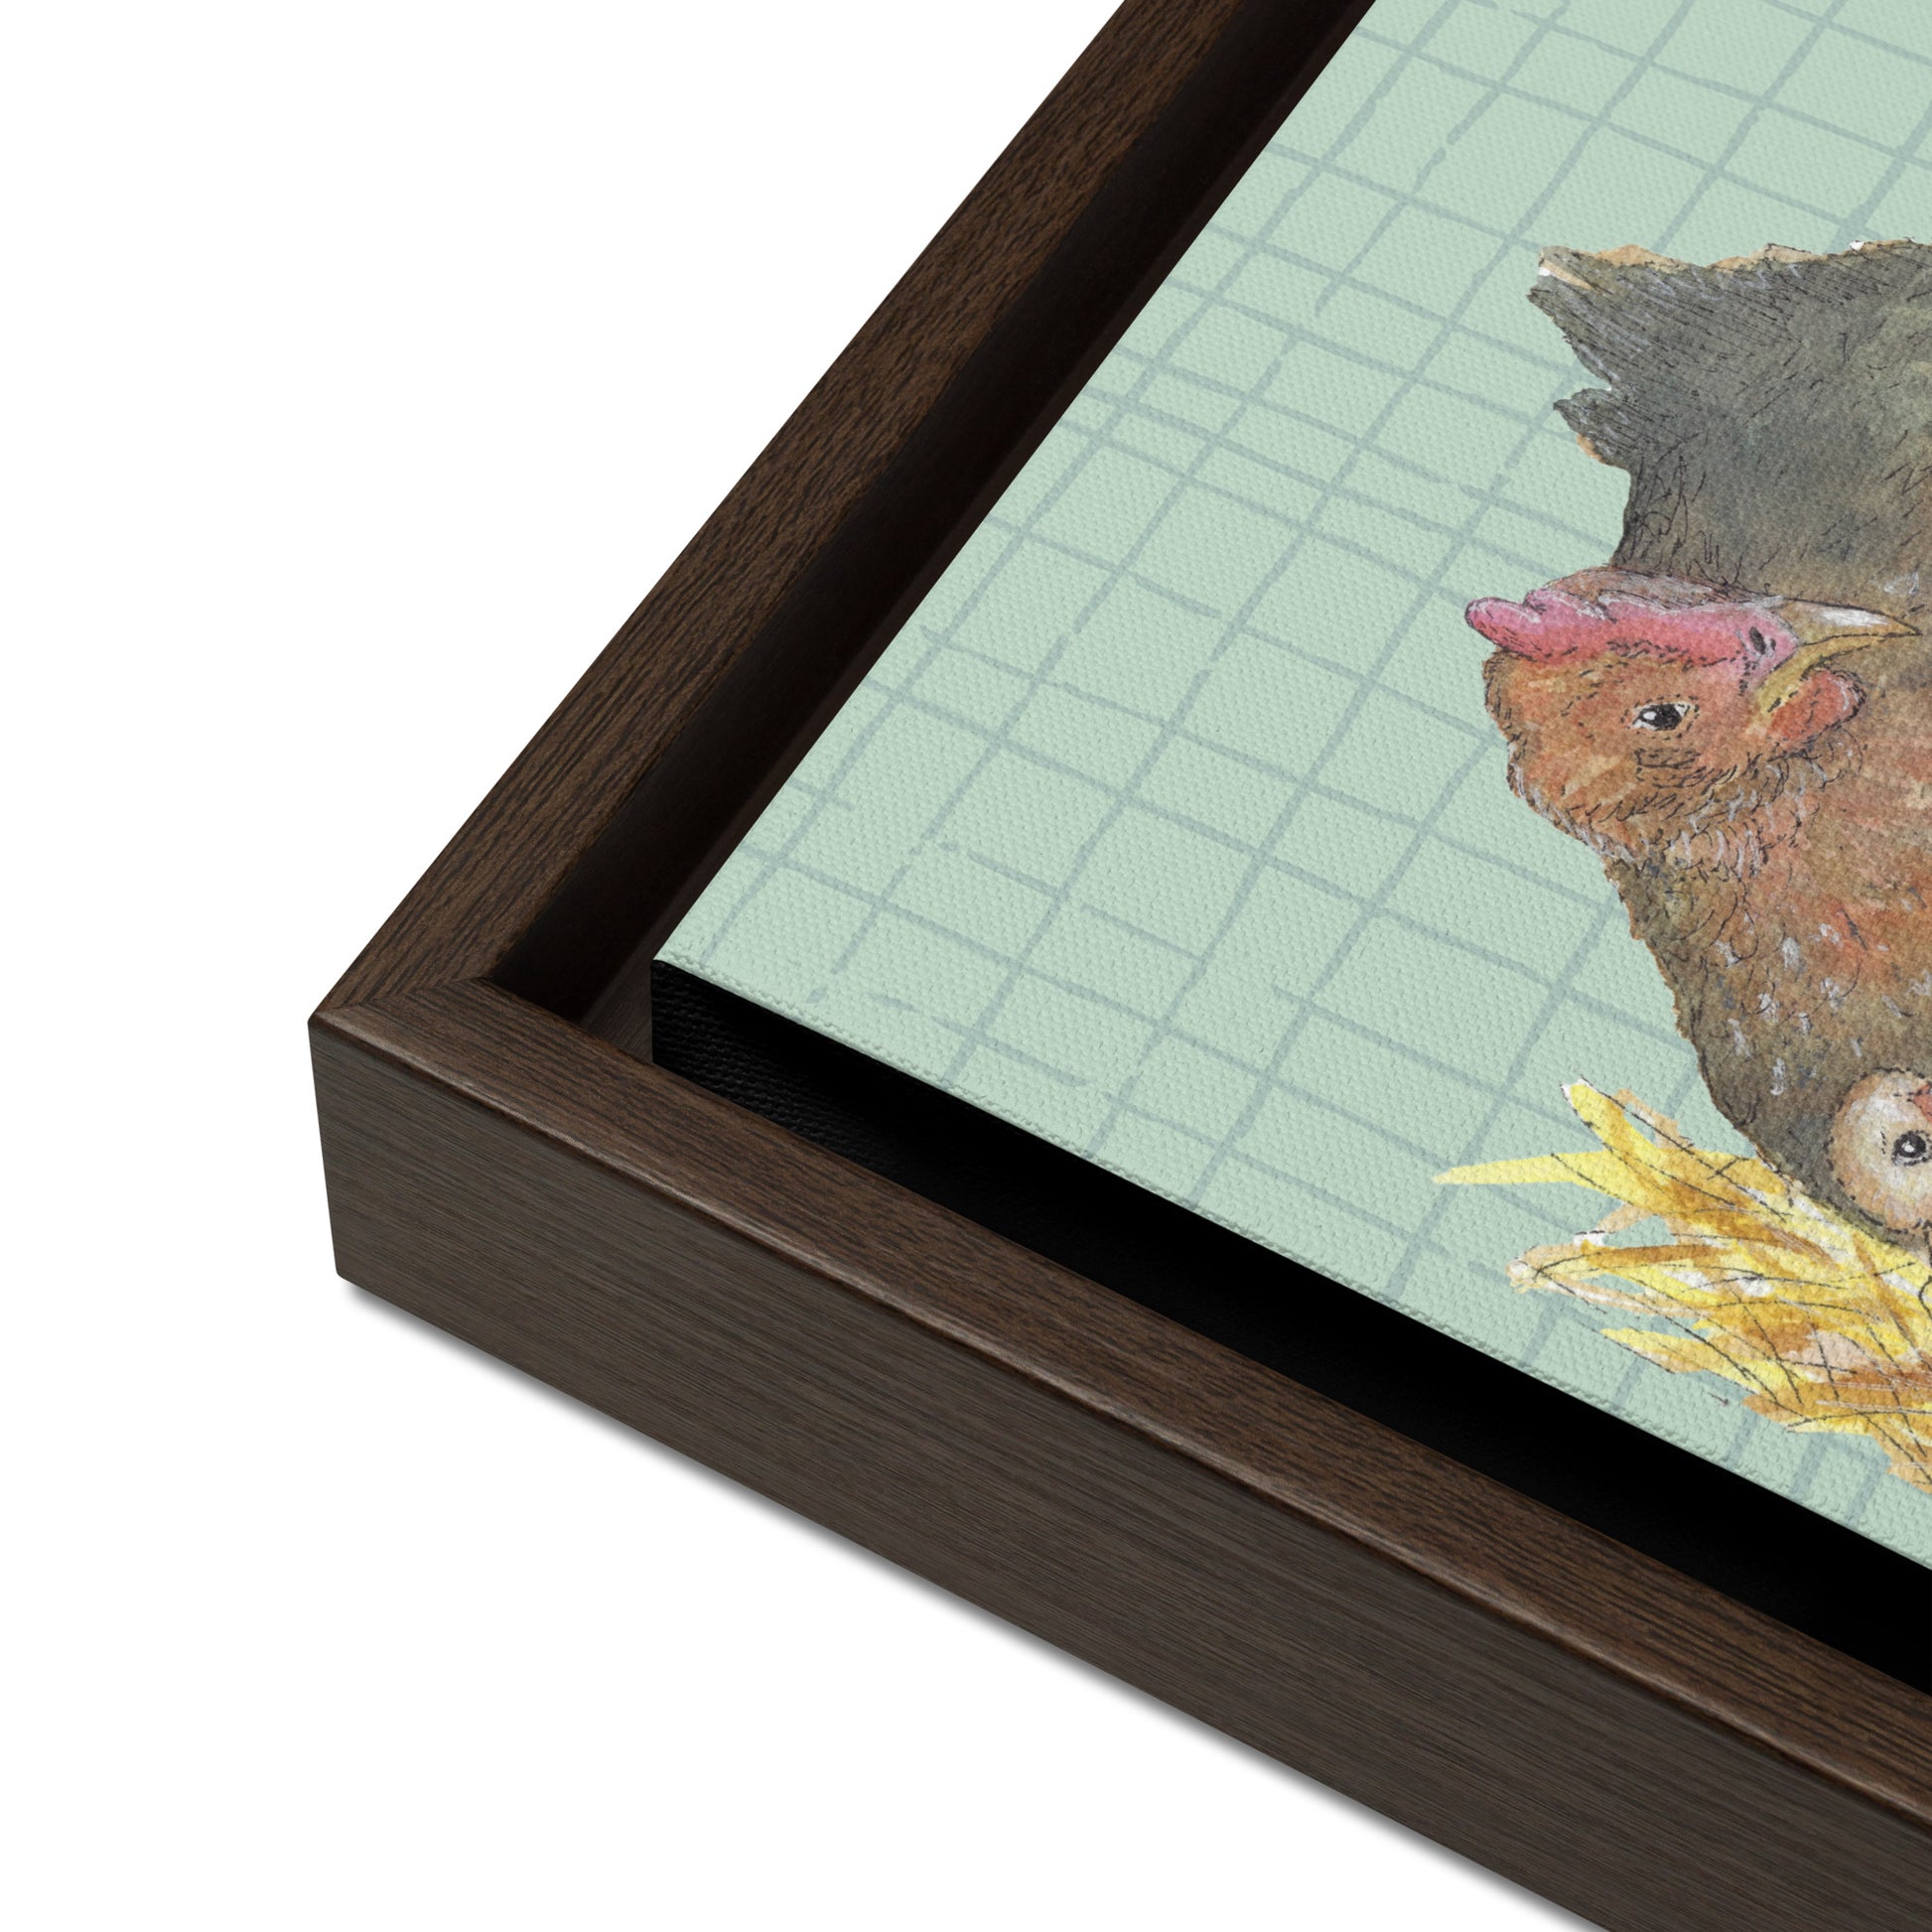 12 by 12 inch Mother Hen Floating Frame Canvas Wall Art. Heather Silver's watercolor painting, Mother Hen, with a green crosshatched background, printed on a stretched canvas and framed with a dark brown pine frame. Hanging hardware included. Detail view of frame.